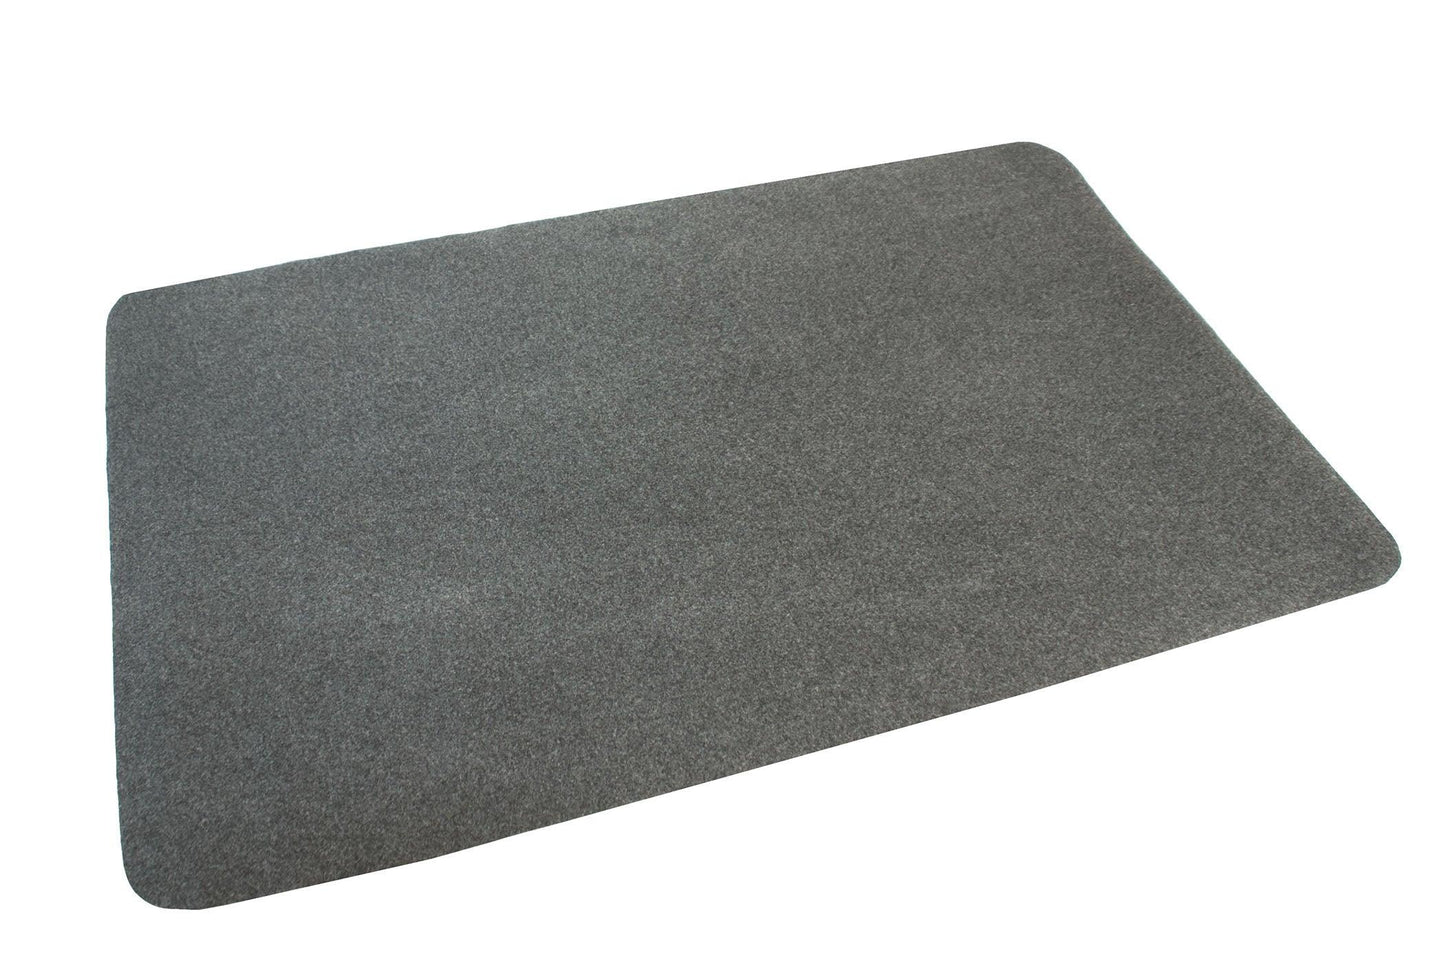 BBQ Protective Floor Mat 48x30 inches - BBQ Land